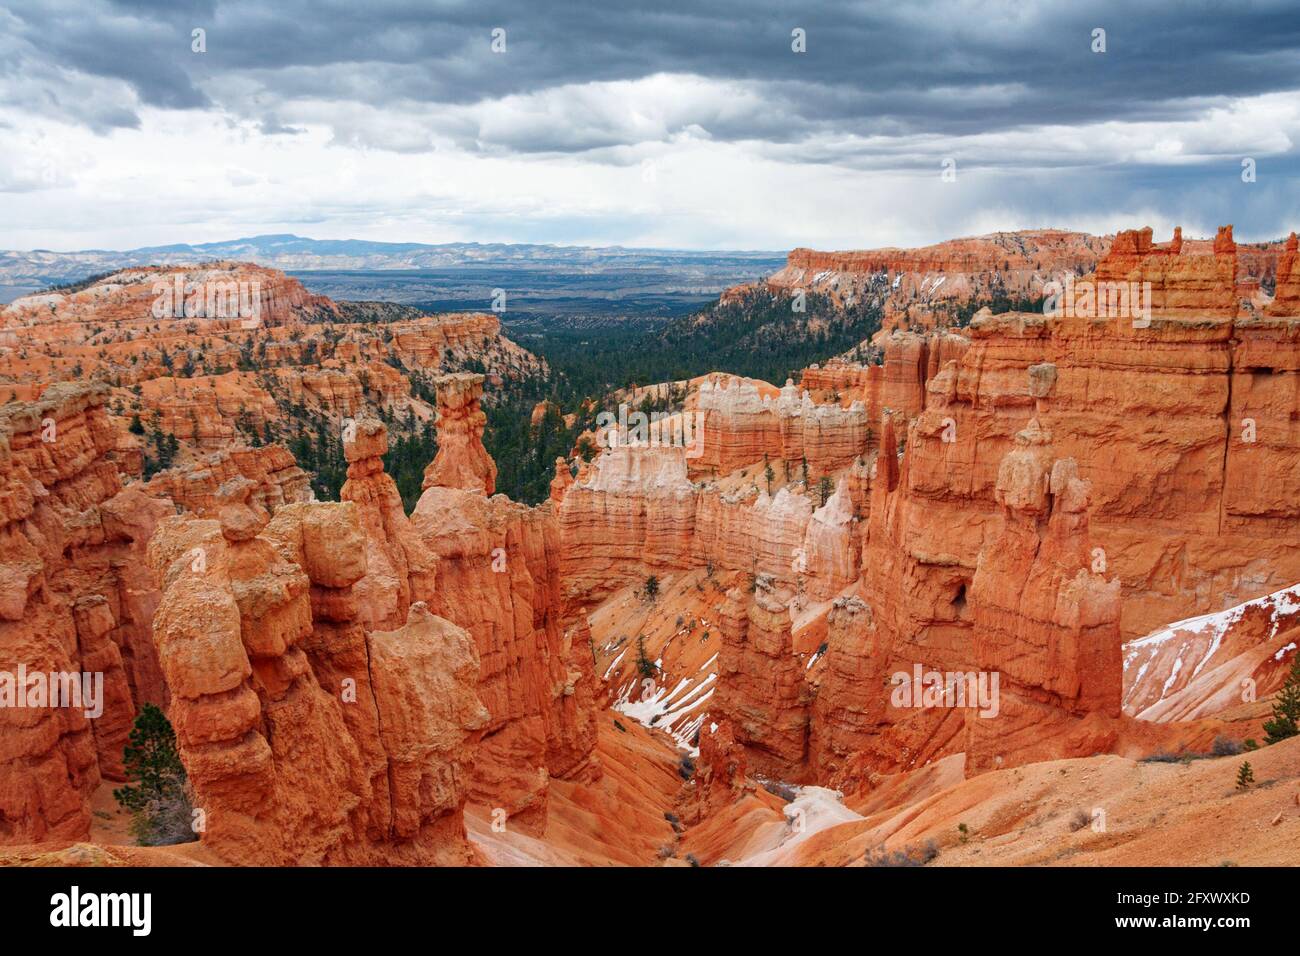 Bryce Canyon, Utah, USA. View of Bryce Amphitheater with countless hoodoos under a cloudy sky. Stock Photo